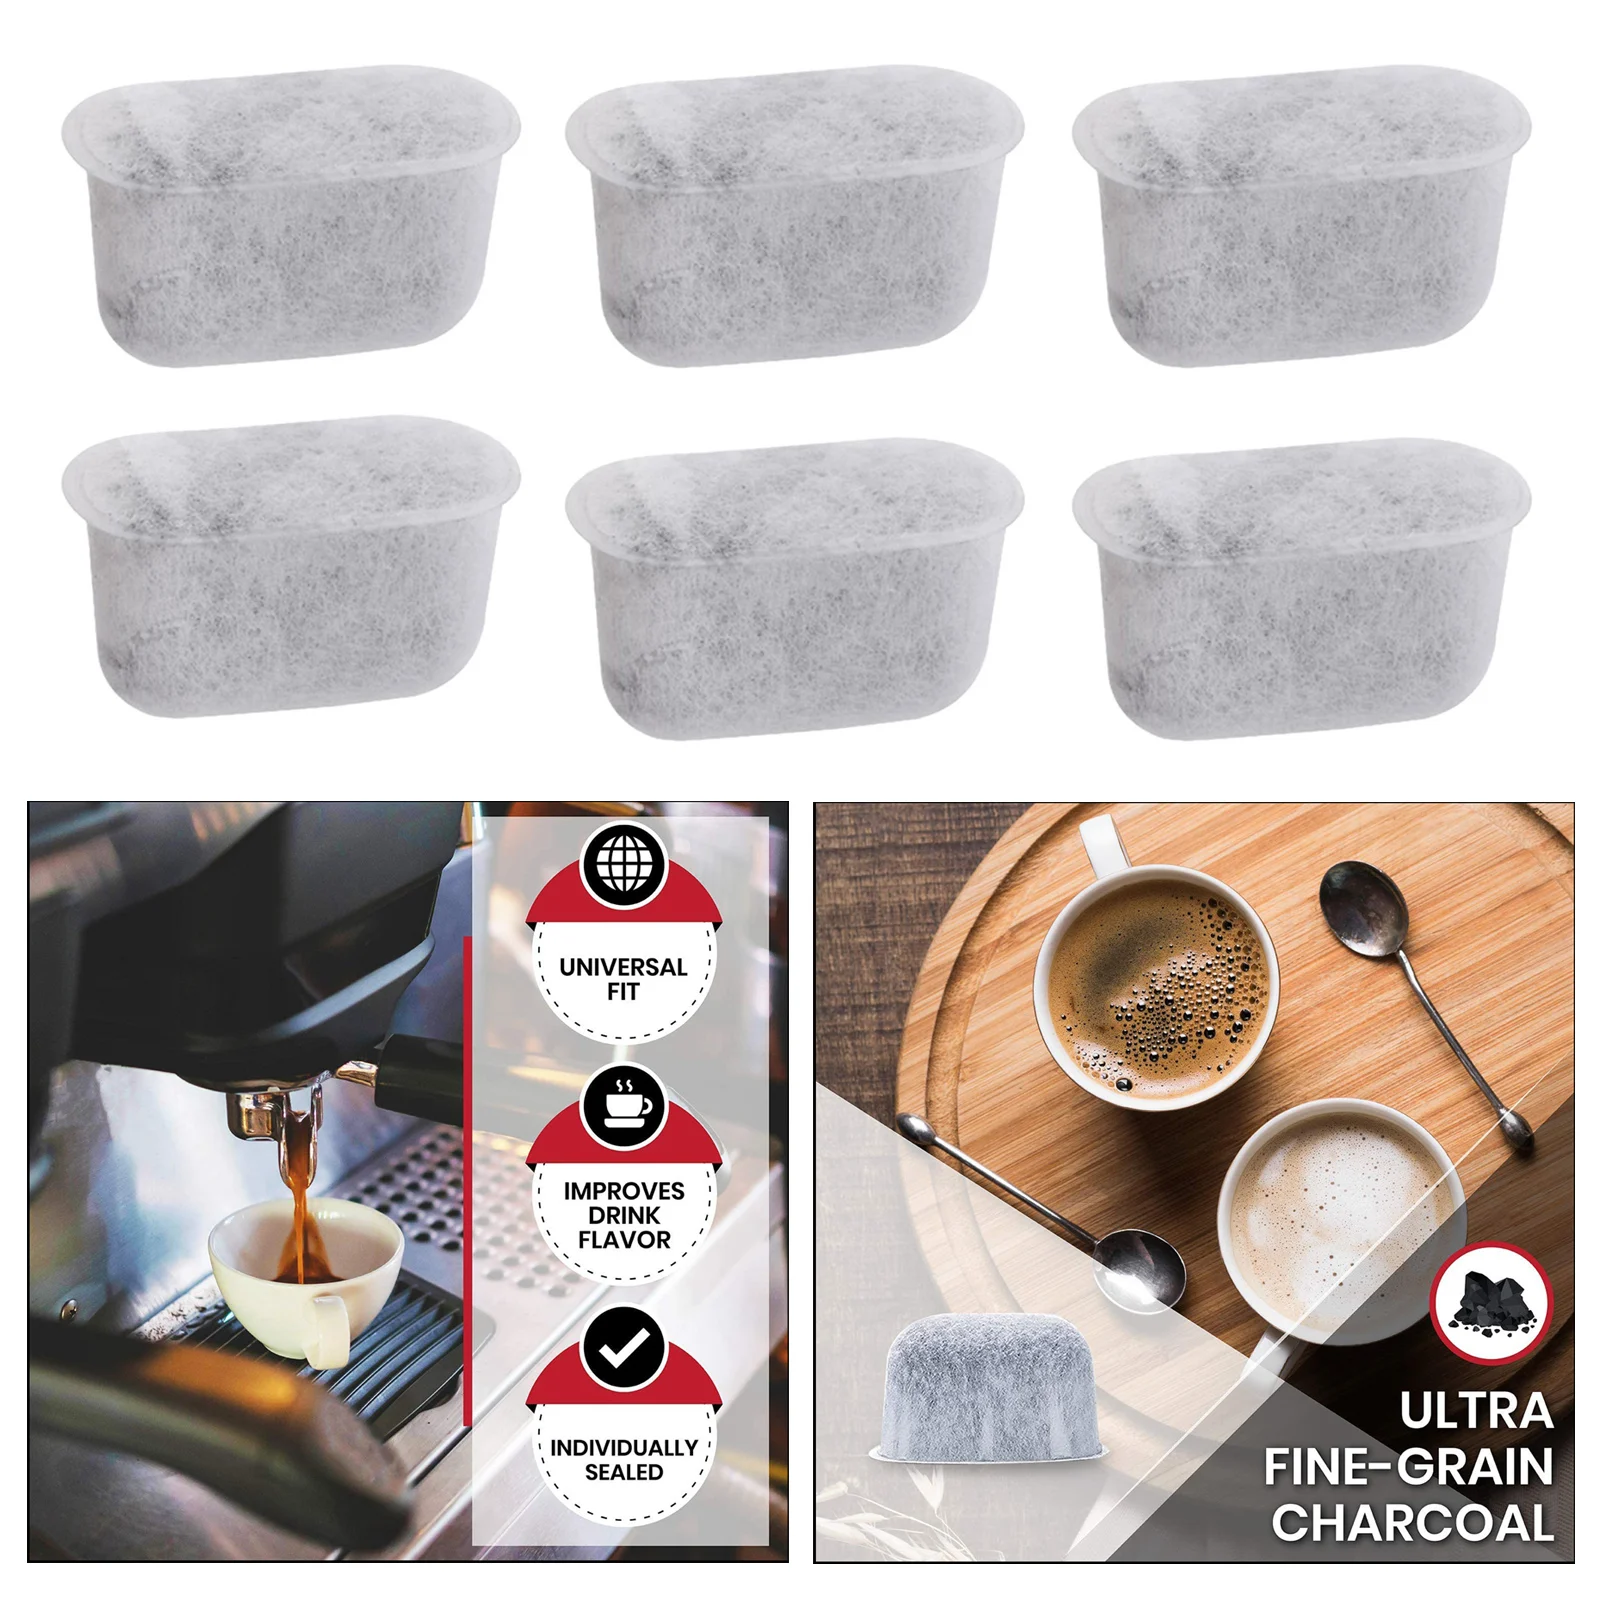 Set of 6 Activated Charcoal Water Filters for Cuisinart Coffee Makers All Models